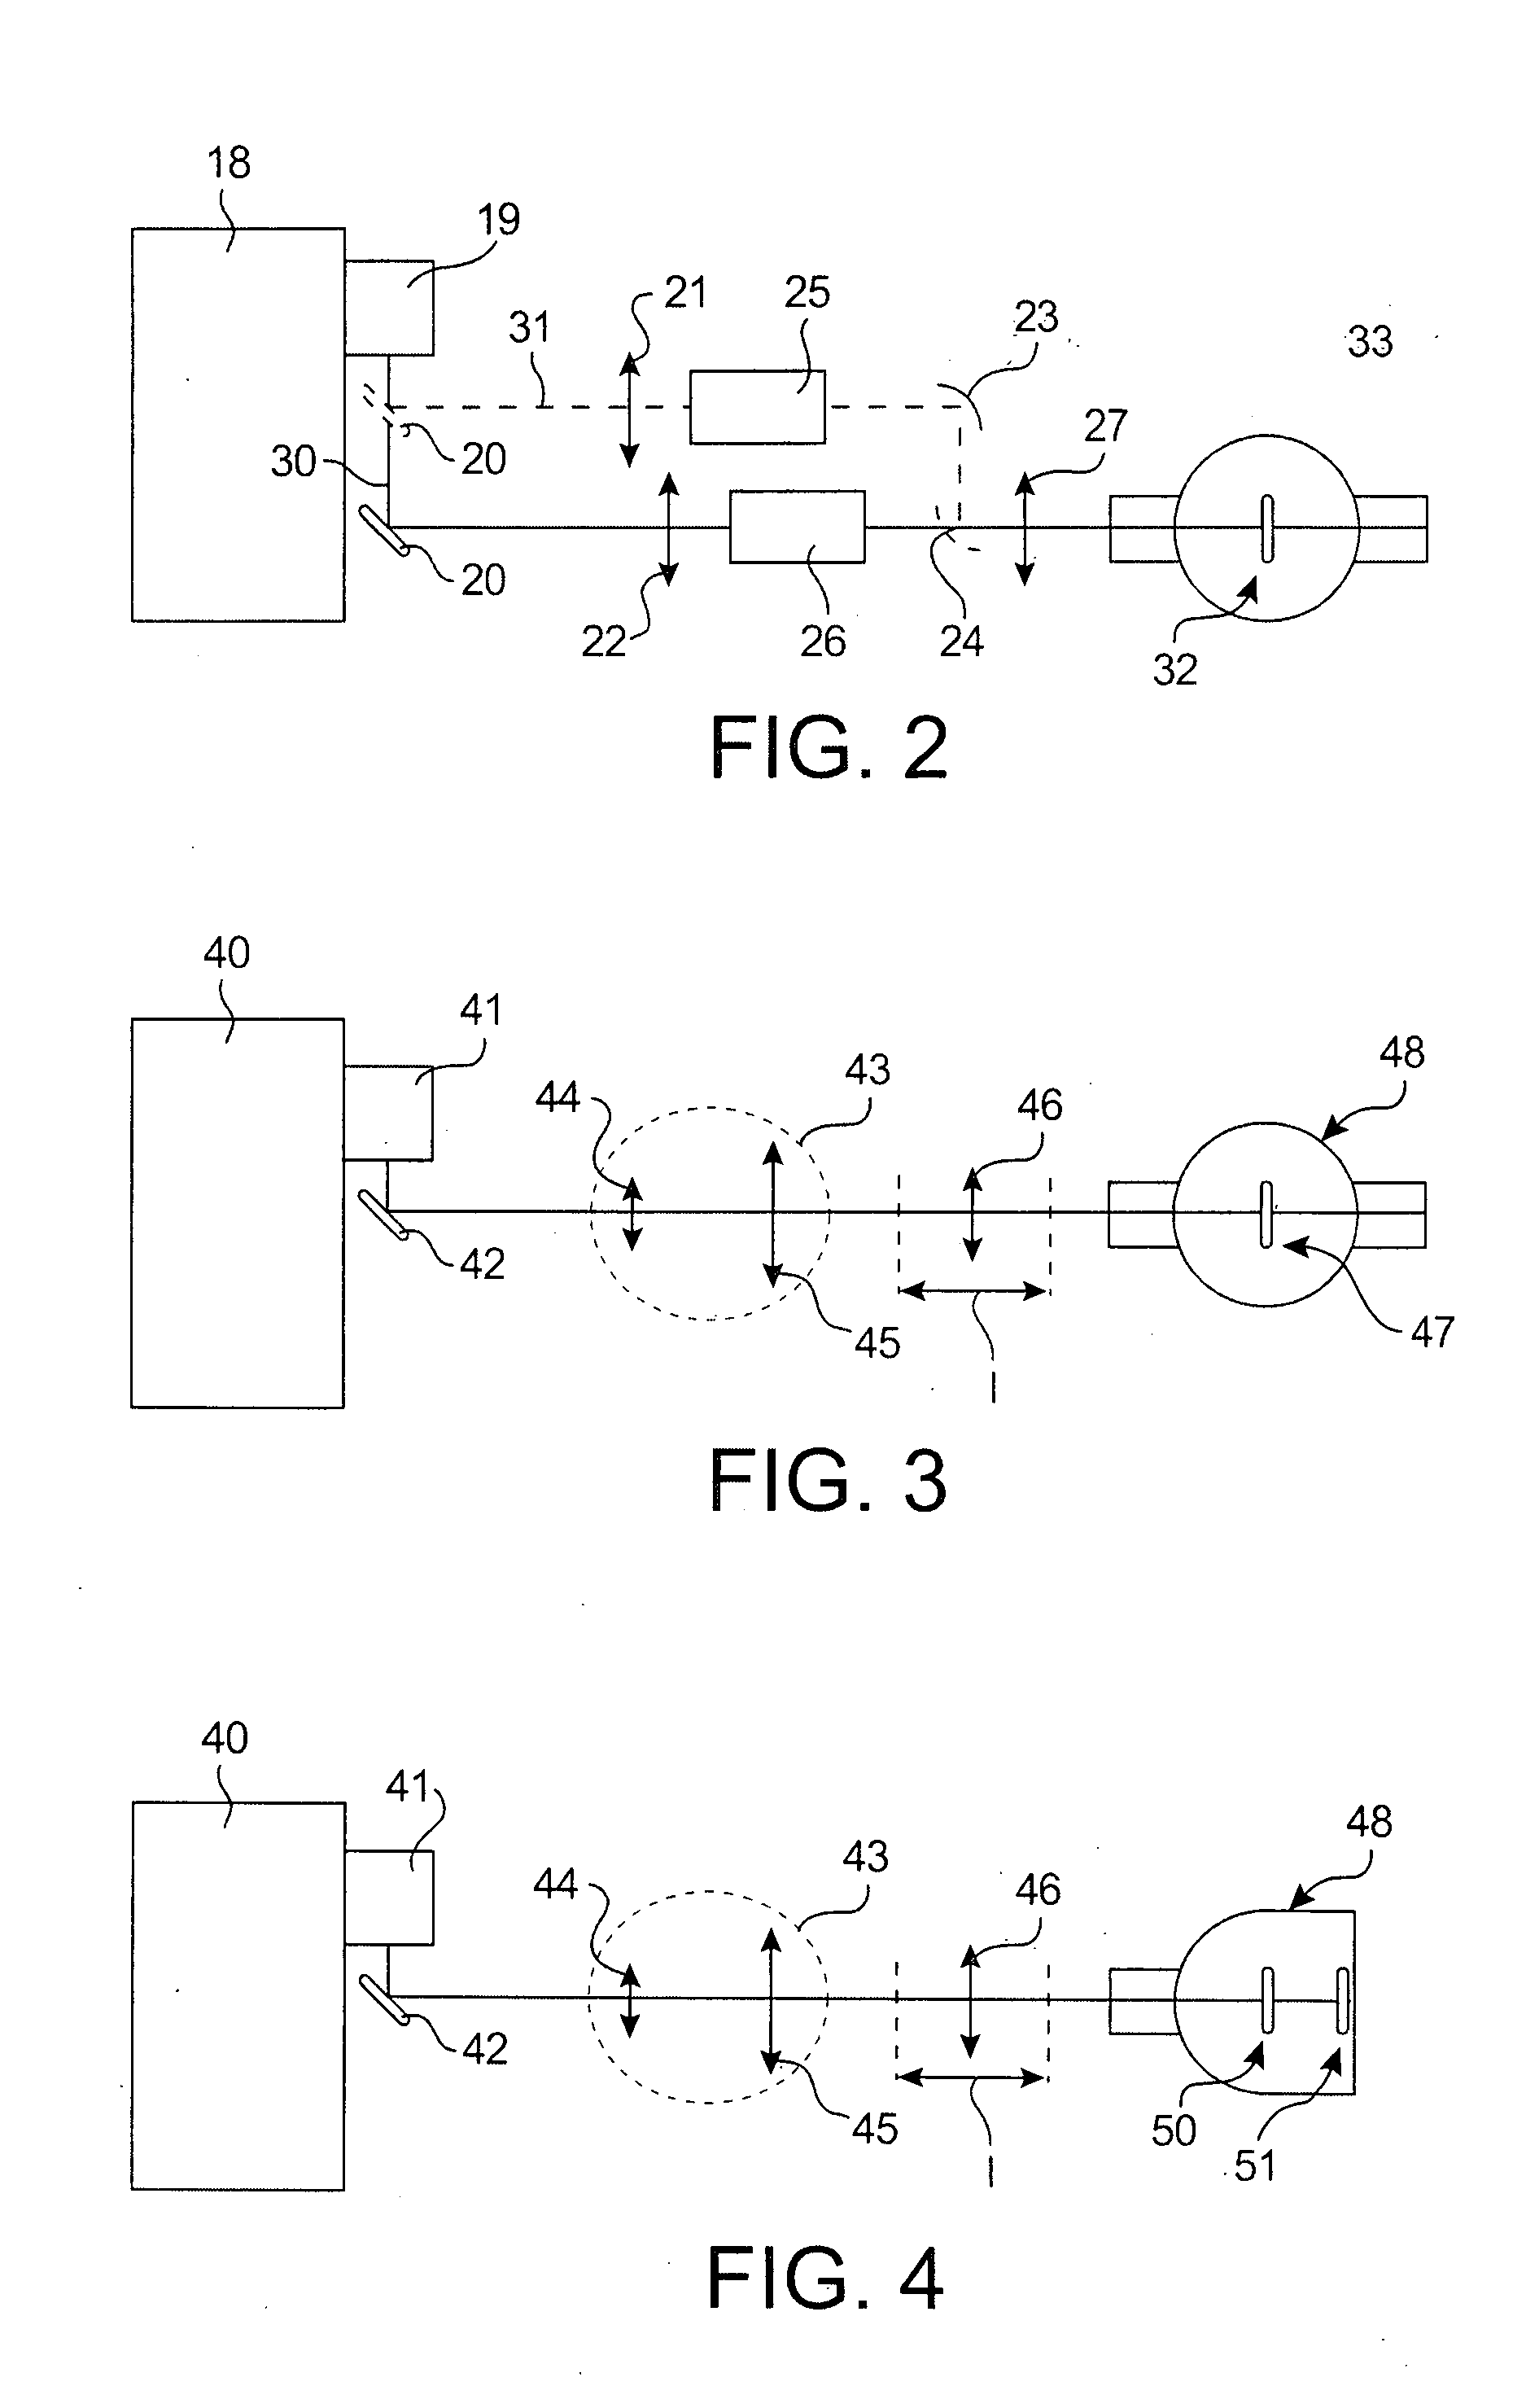 System and Process for Production of Nanometric or Sub-Micrometric Powders in Continuous Flus Under the Action of a Pyrolysis Laser